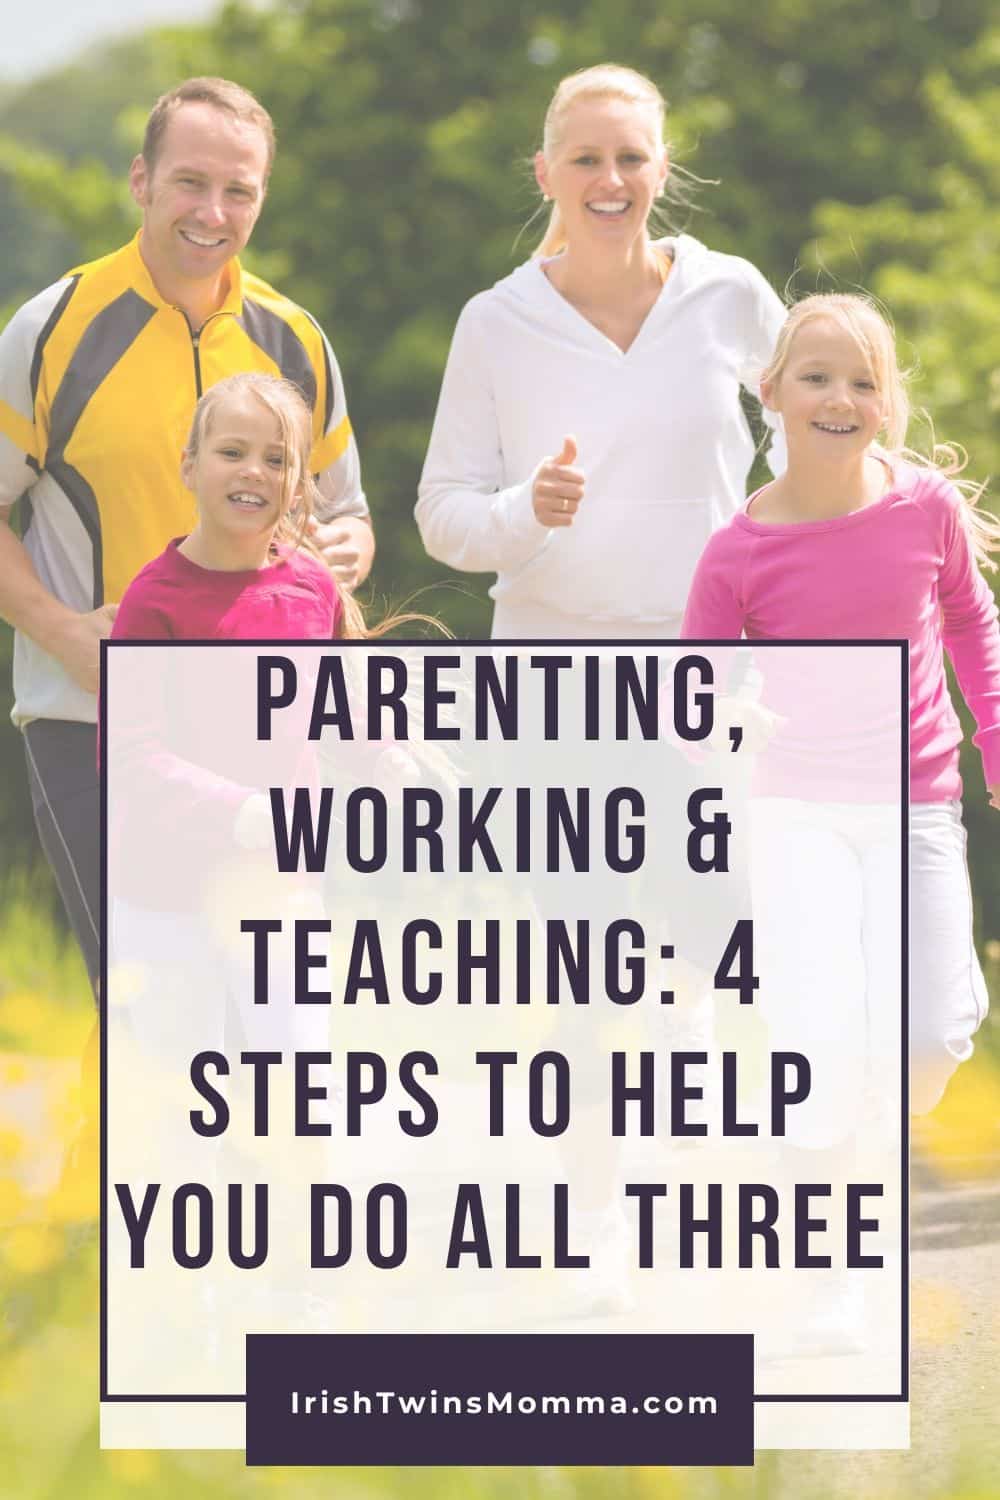 Once they’ve finished their physical activity, they will be more likely to play quietly for a period of time. We do this mid-morning and afternoon. That way when we come in to eat lunch and dinner they actually want to sit down. via @irishtwinsmom11